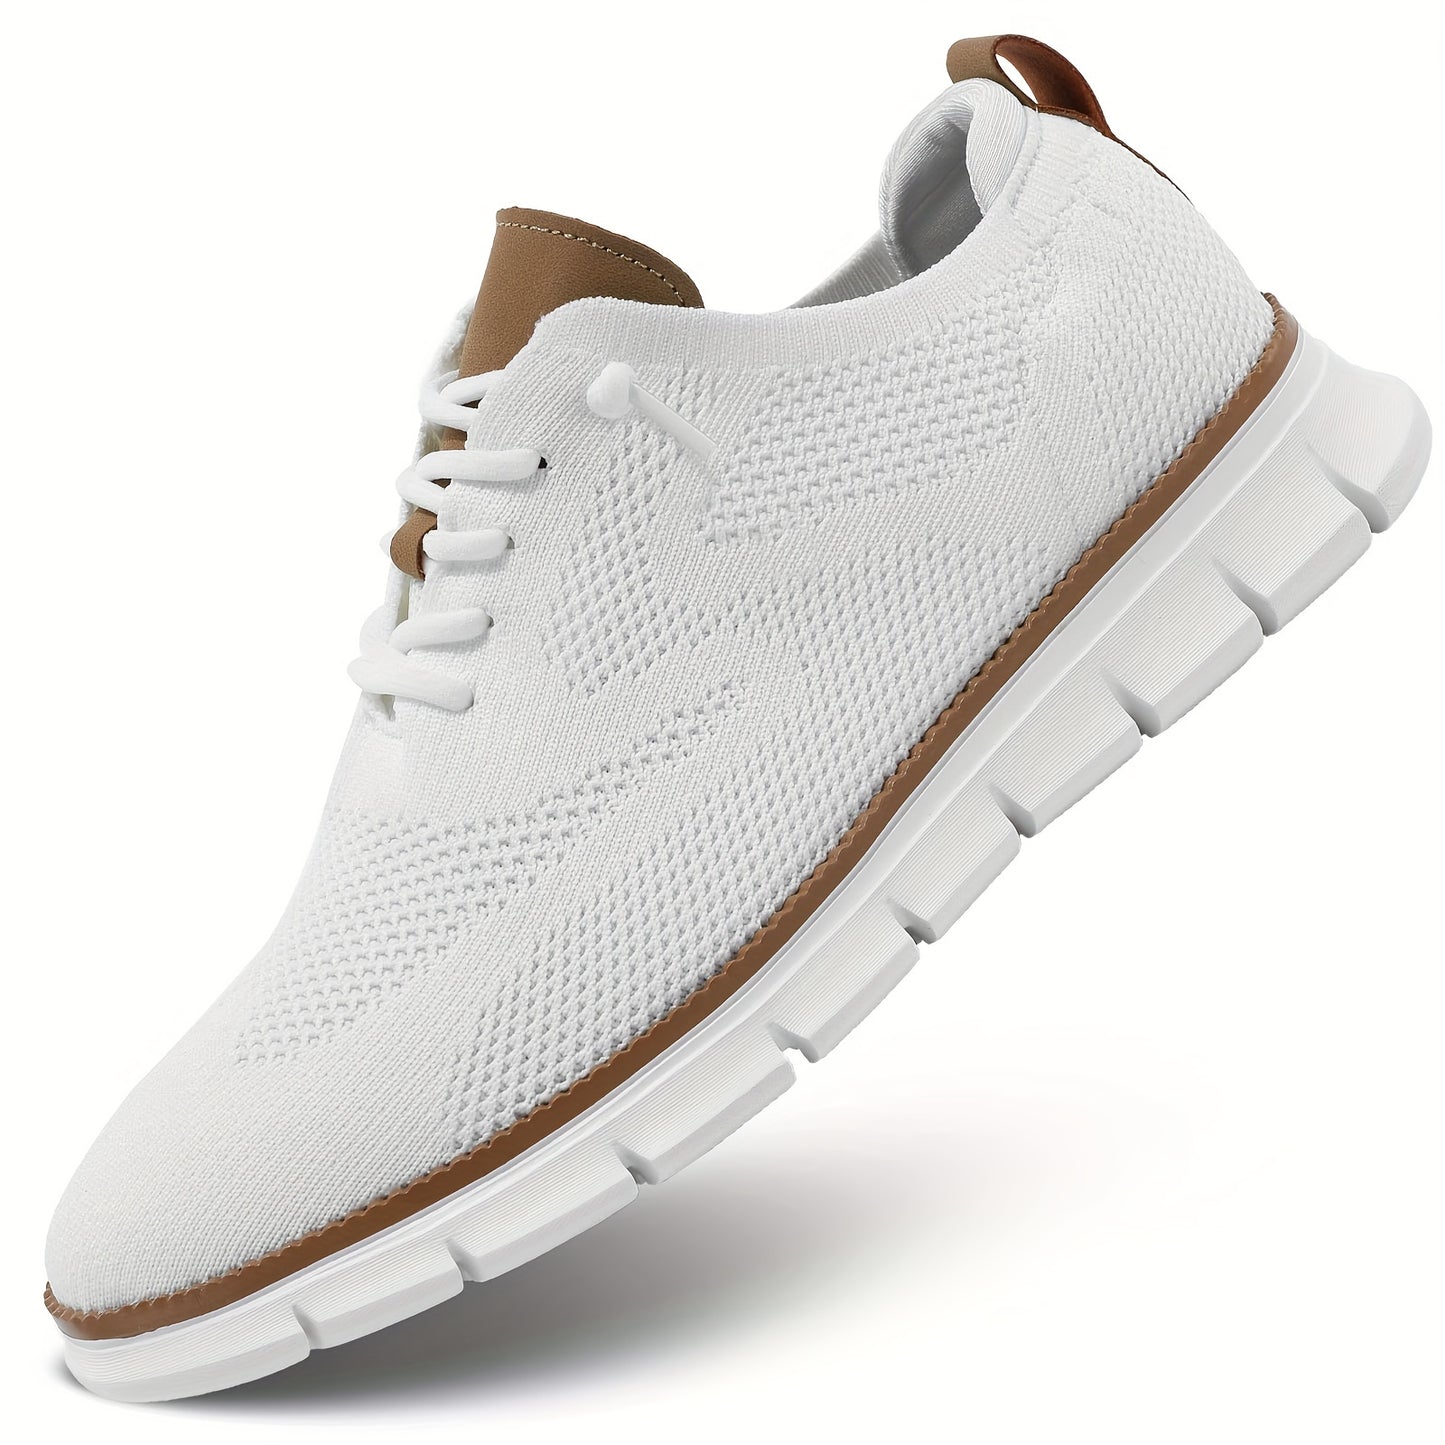 Lace-up Sneakers, Athletic Lightweight And Breathable